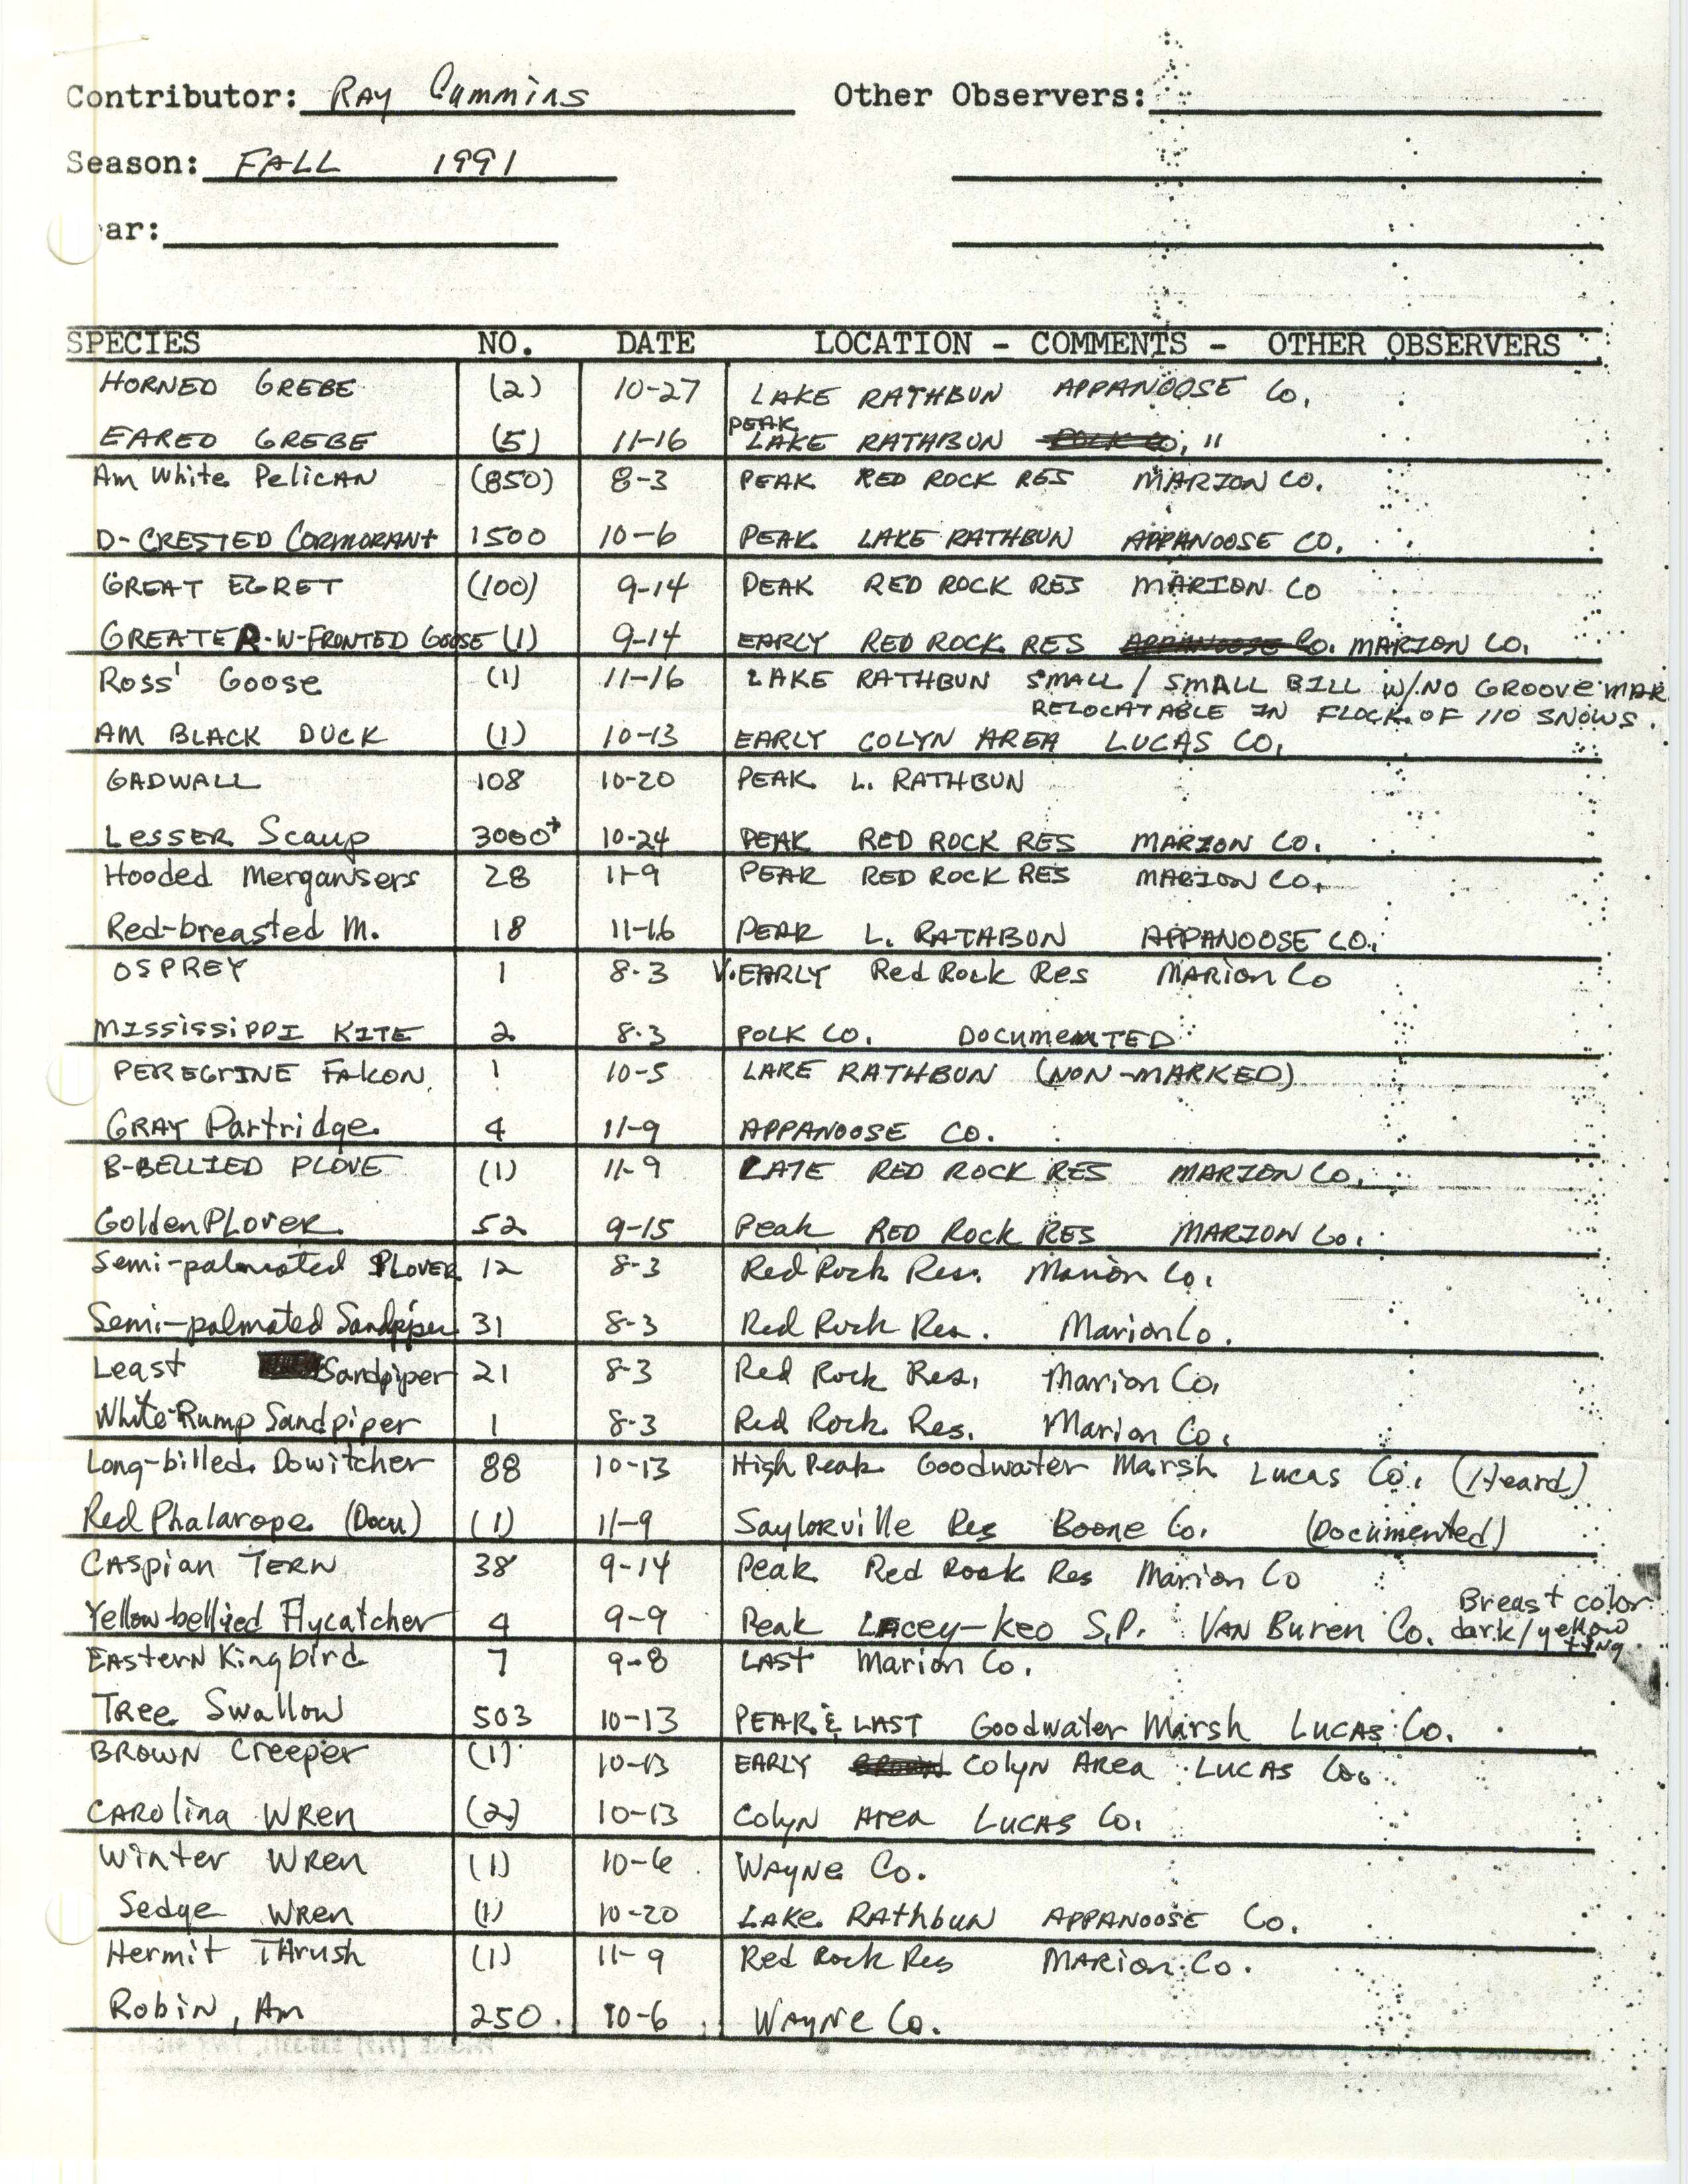 Field notes contributed by Raymond L. Cummins, fall 1991